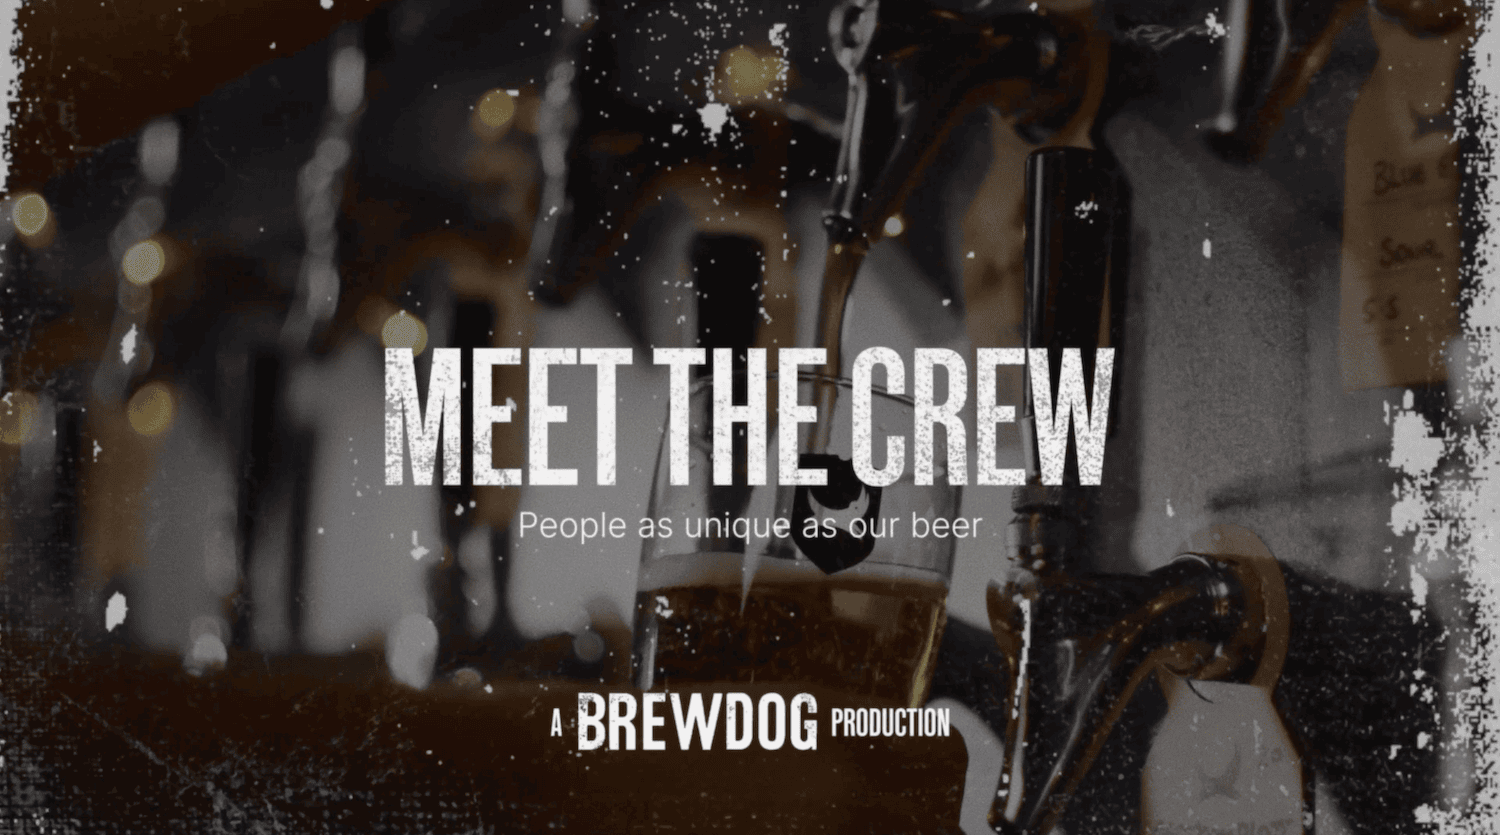 Holding image for the Brewdog film that says 'MEET THE CREW'